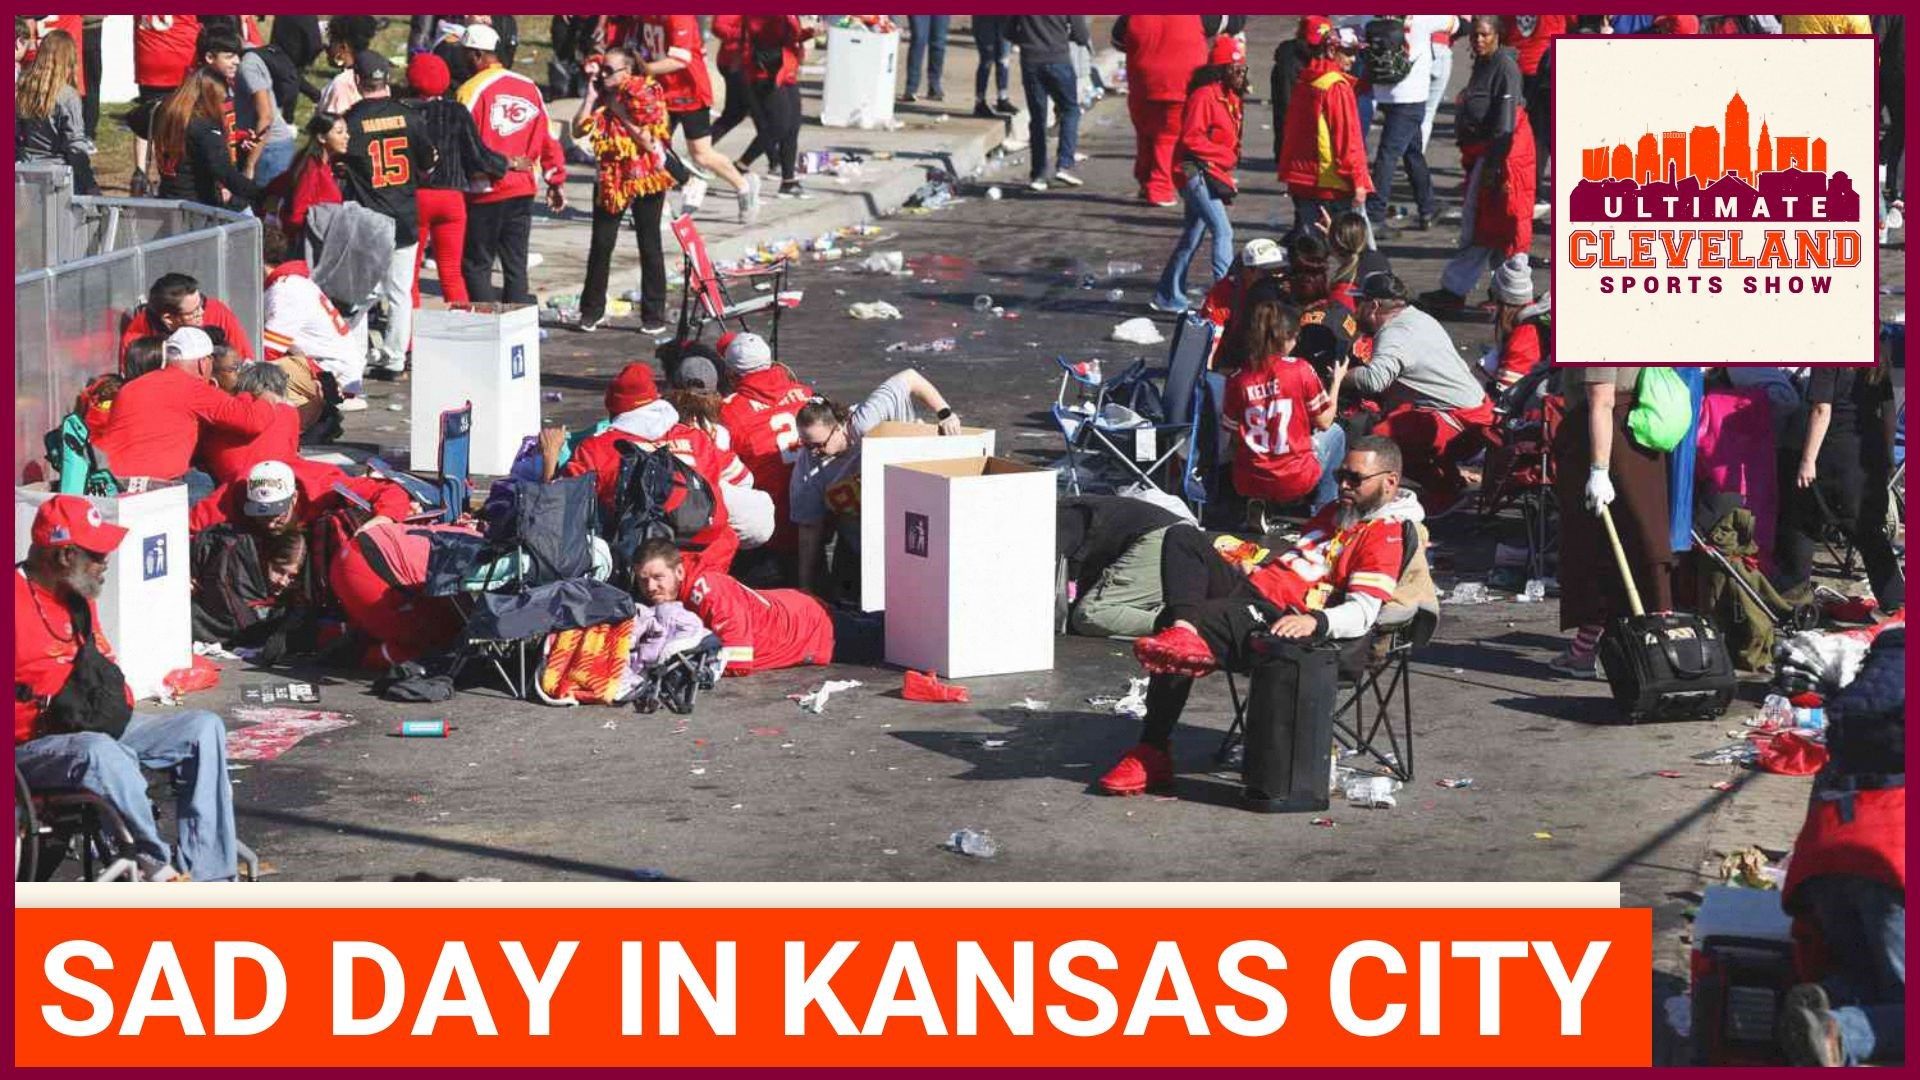 After yesterday's horrific act during the Kansas City Chiefs parade, would you be worried about attending a championship parade in Cleveland?